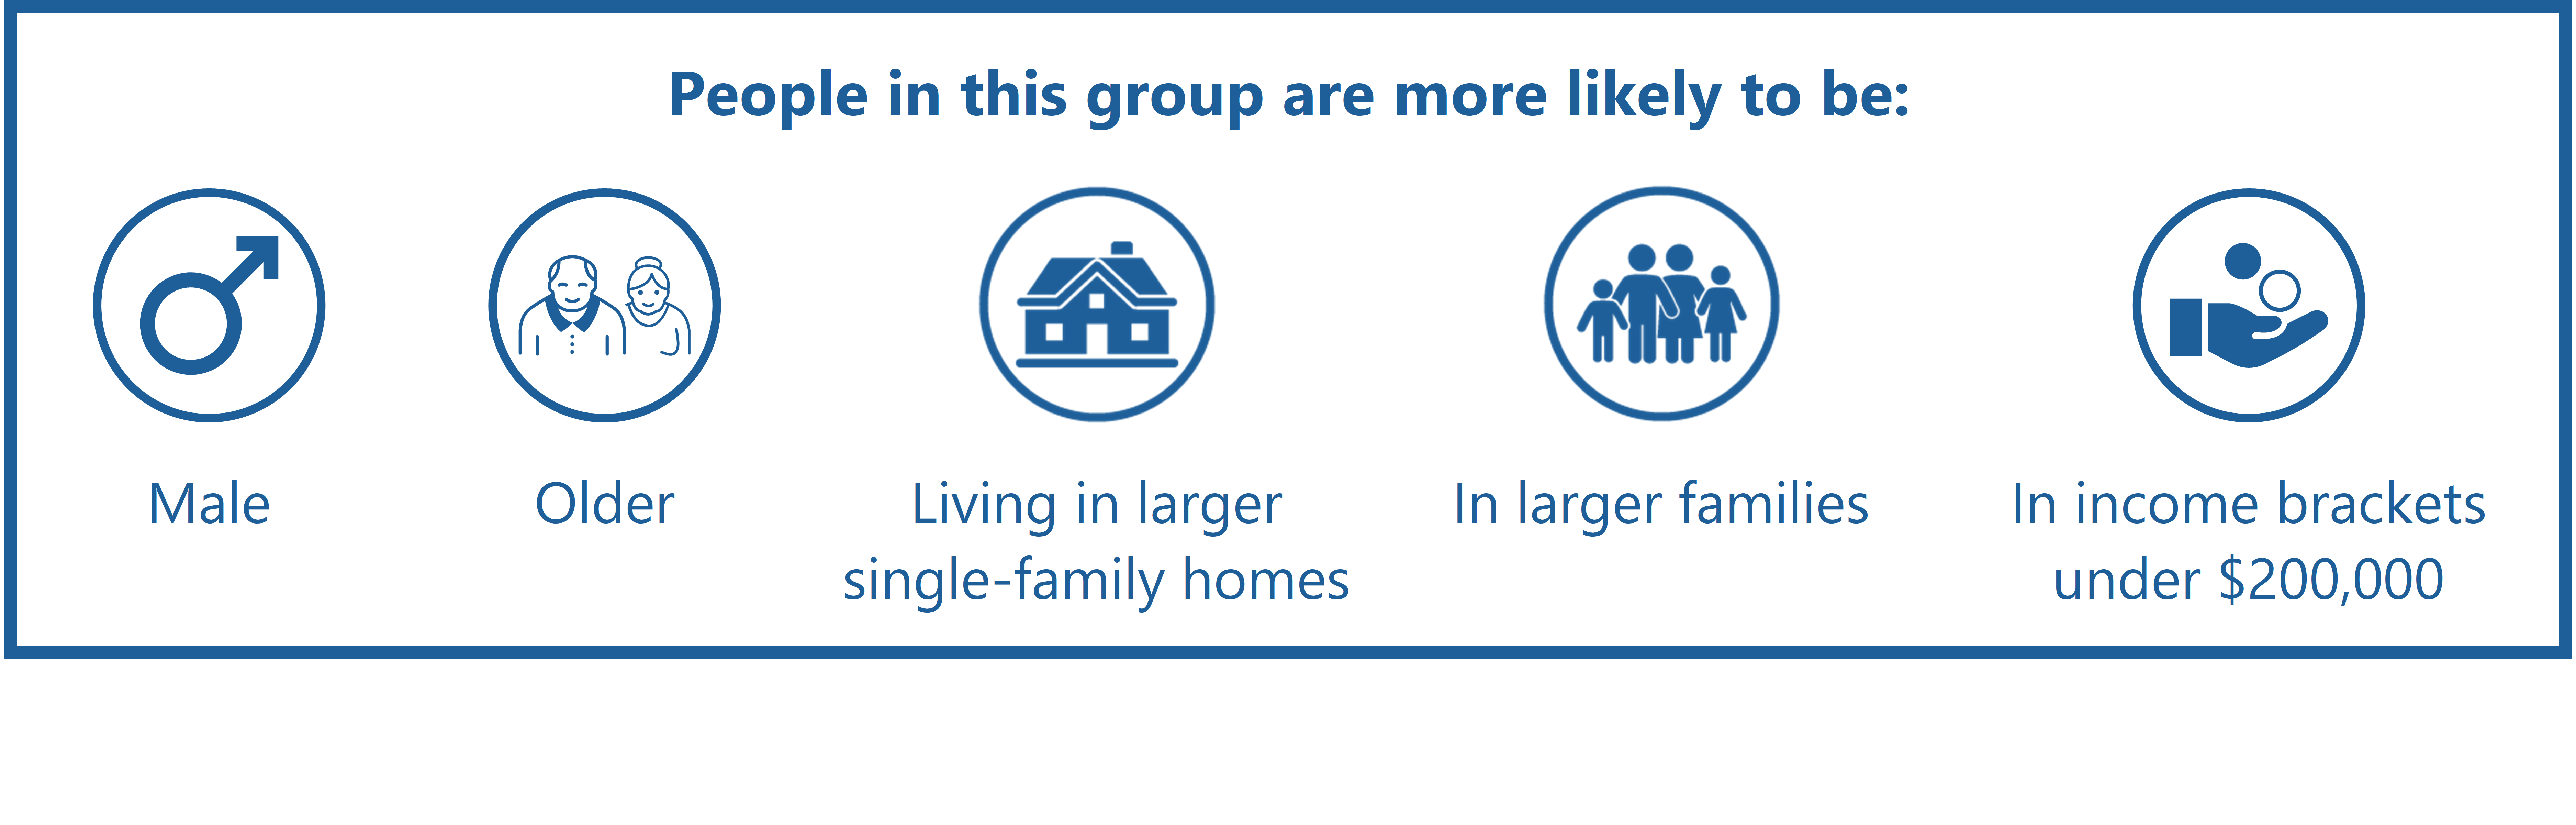 Male, Older, Living in larger single-family homes, In larger families, In income brackets under $200,000